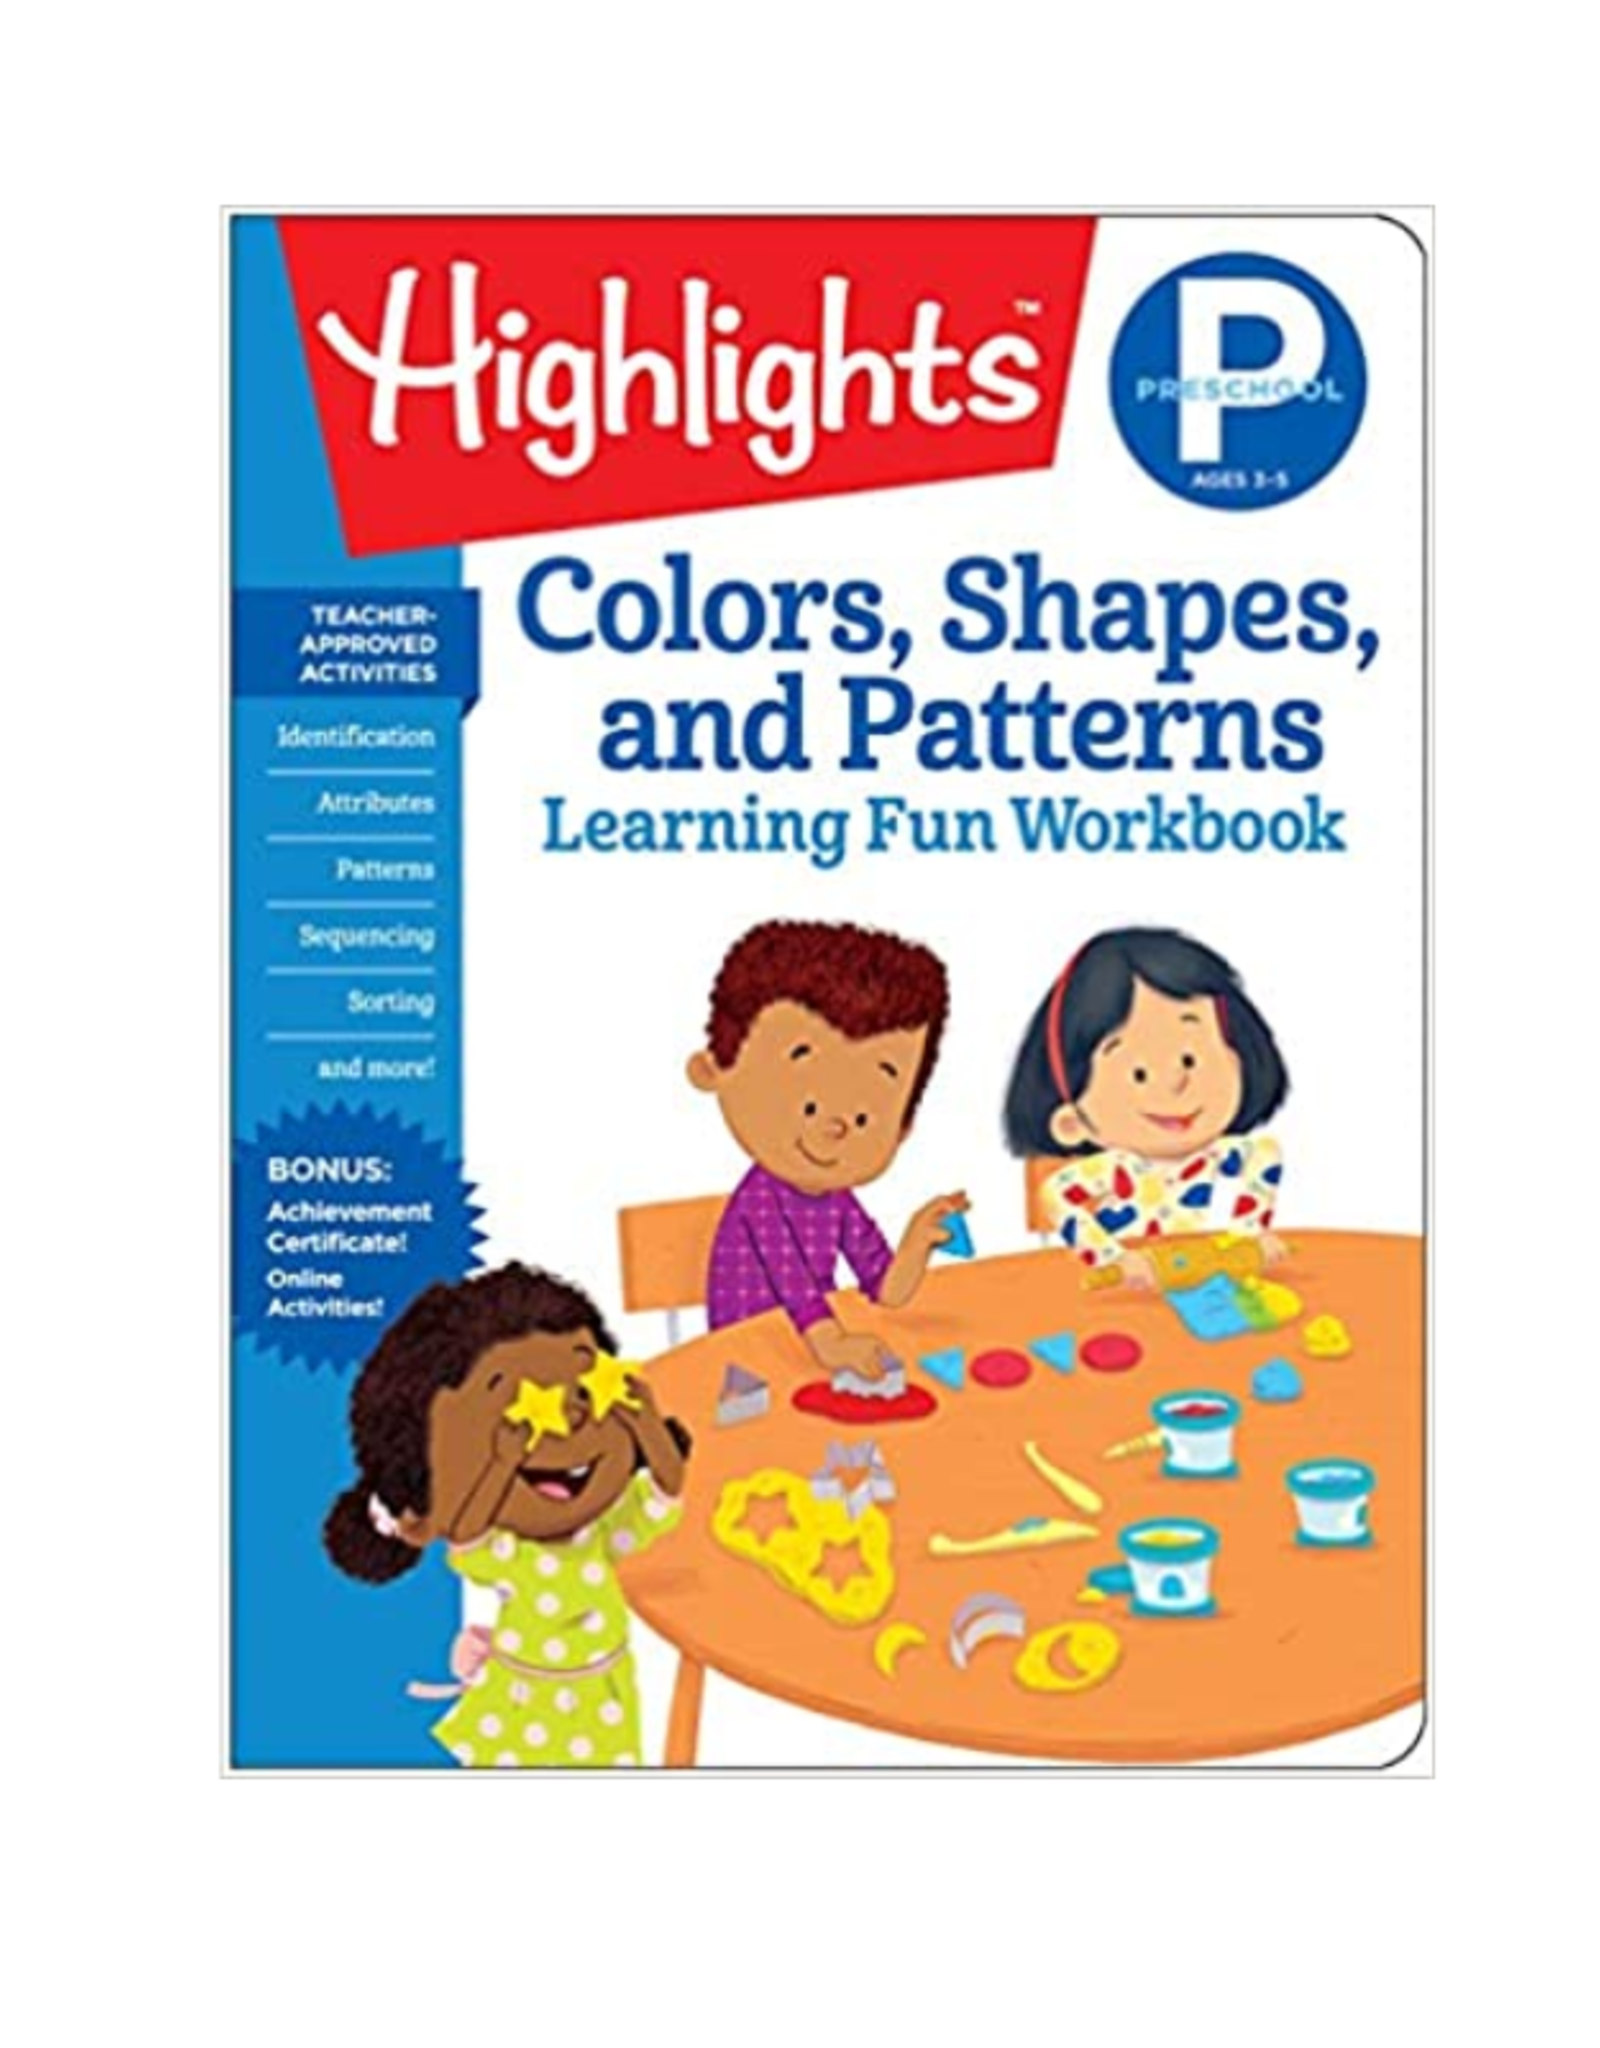 Preschool (Colors, Shapes, and Patterns)